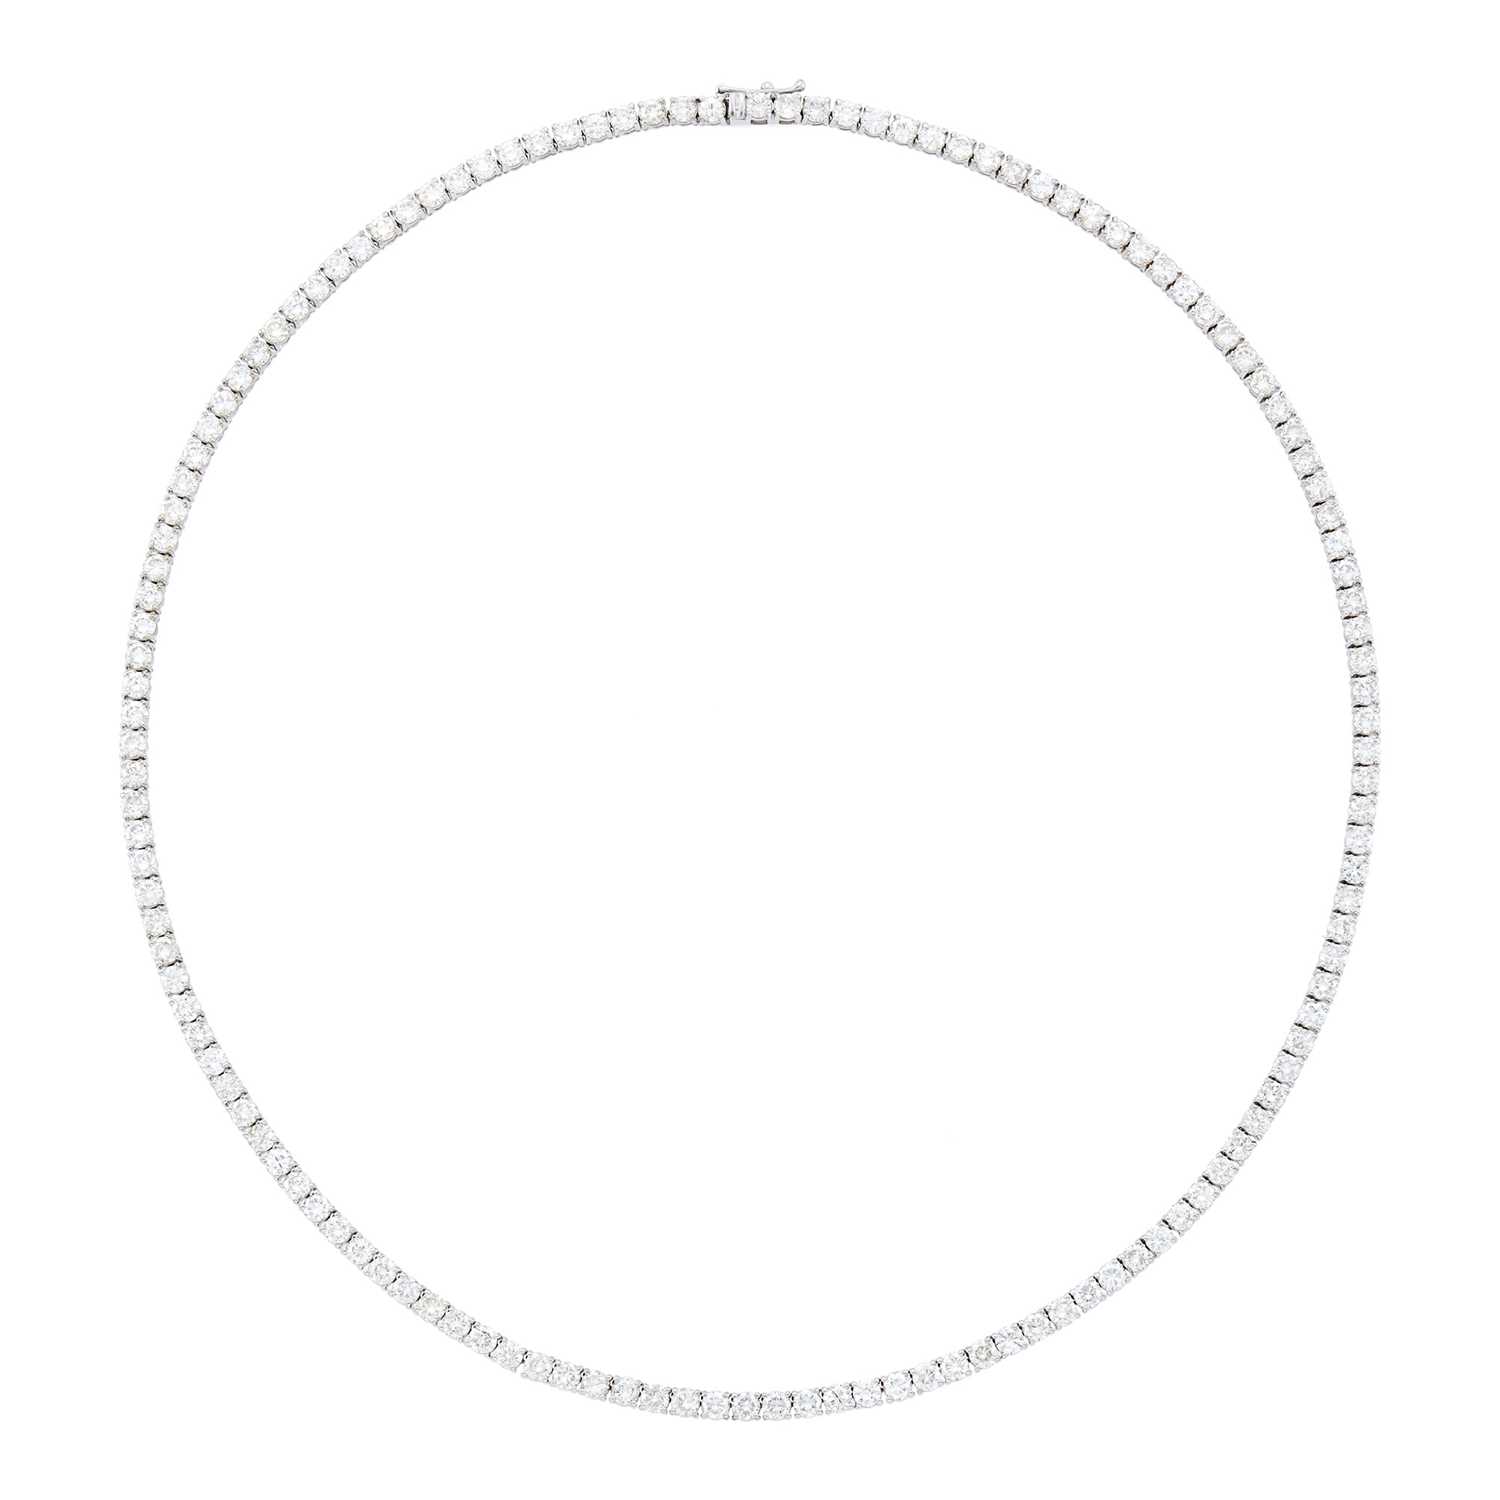 Lot 125 - White Gold and Diamond Necklace